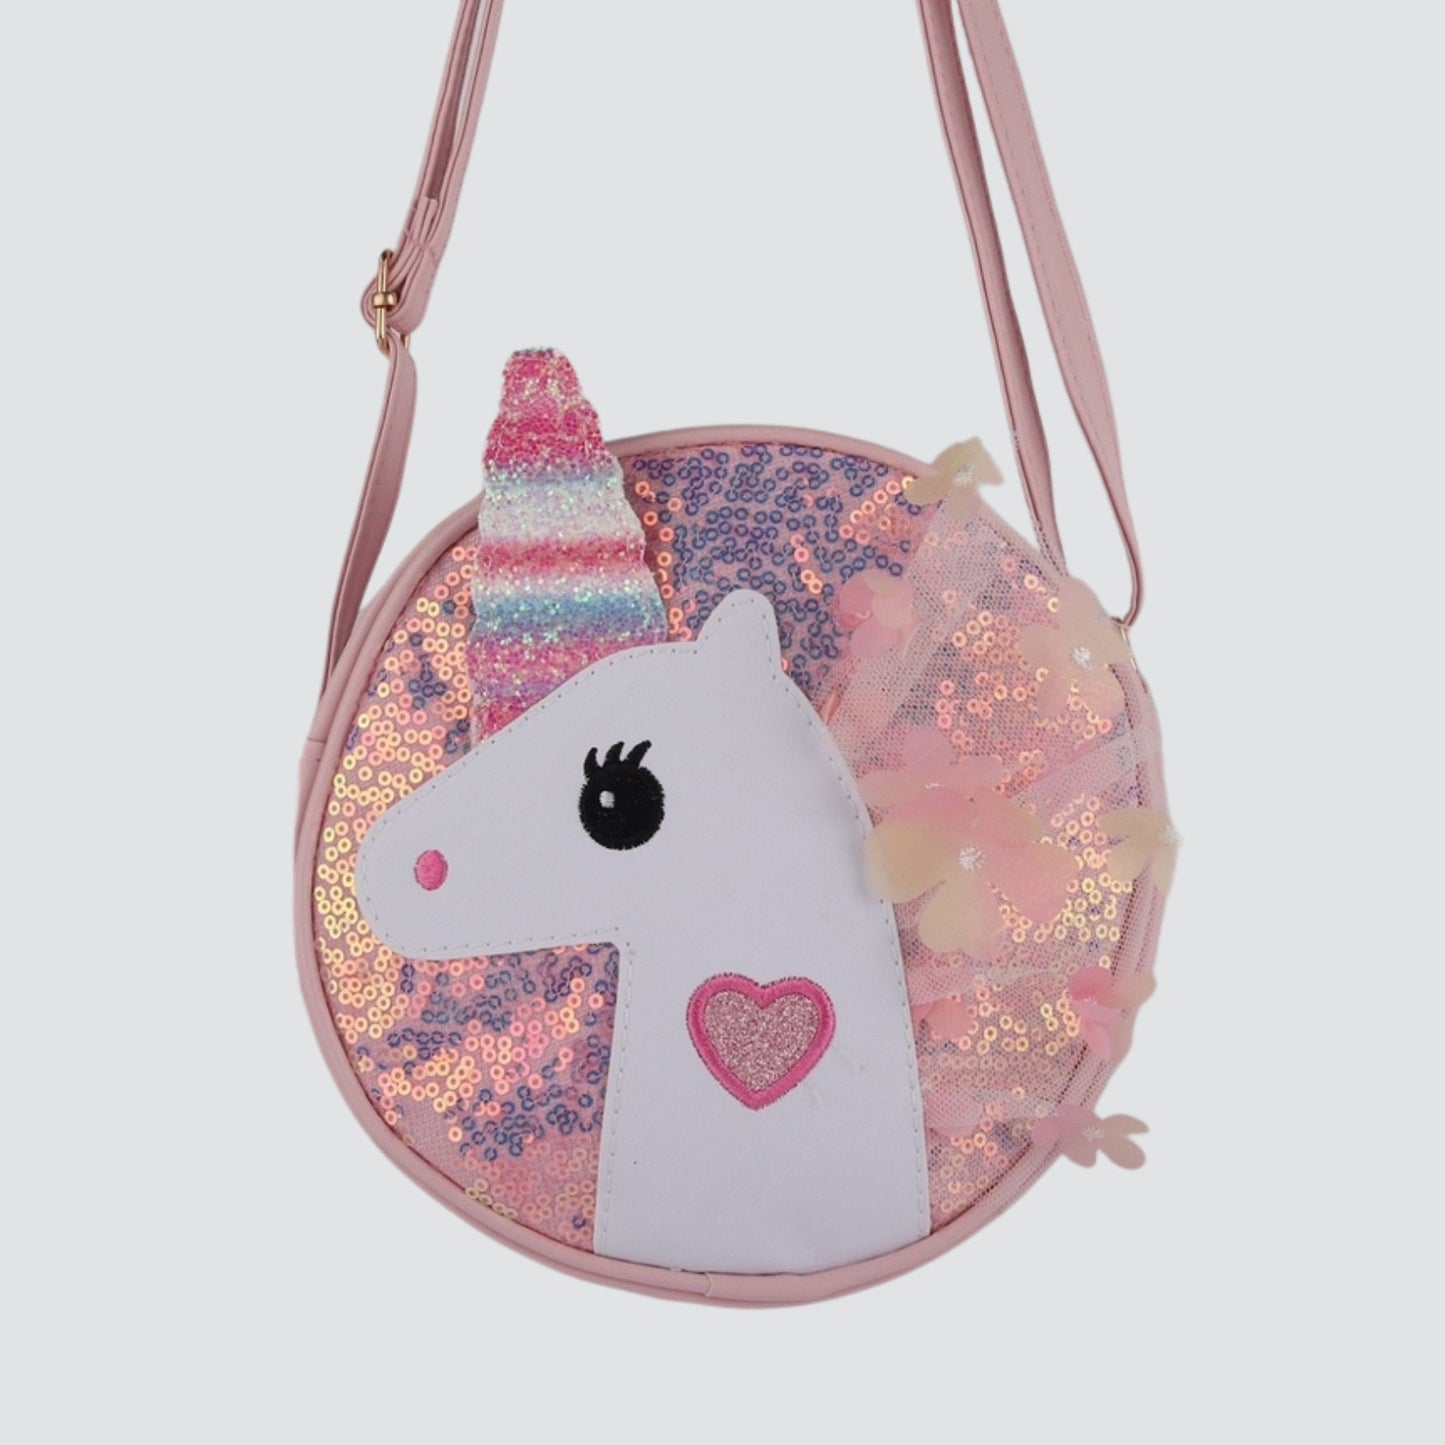 Peach Crossbody with Unicorn Face and Sequins